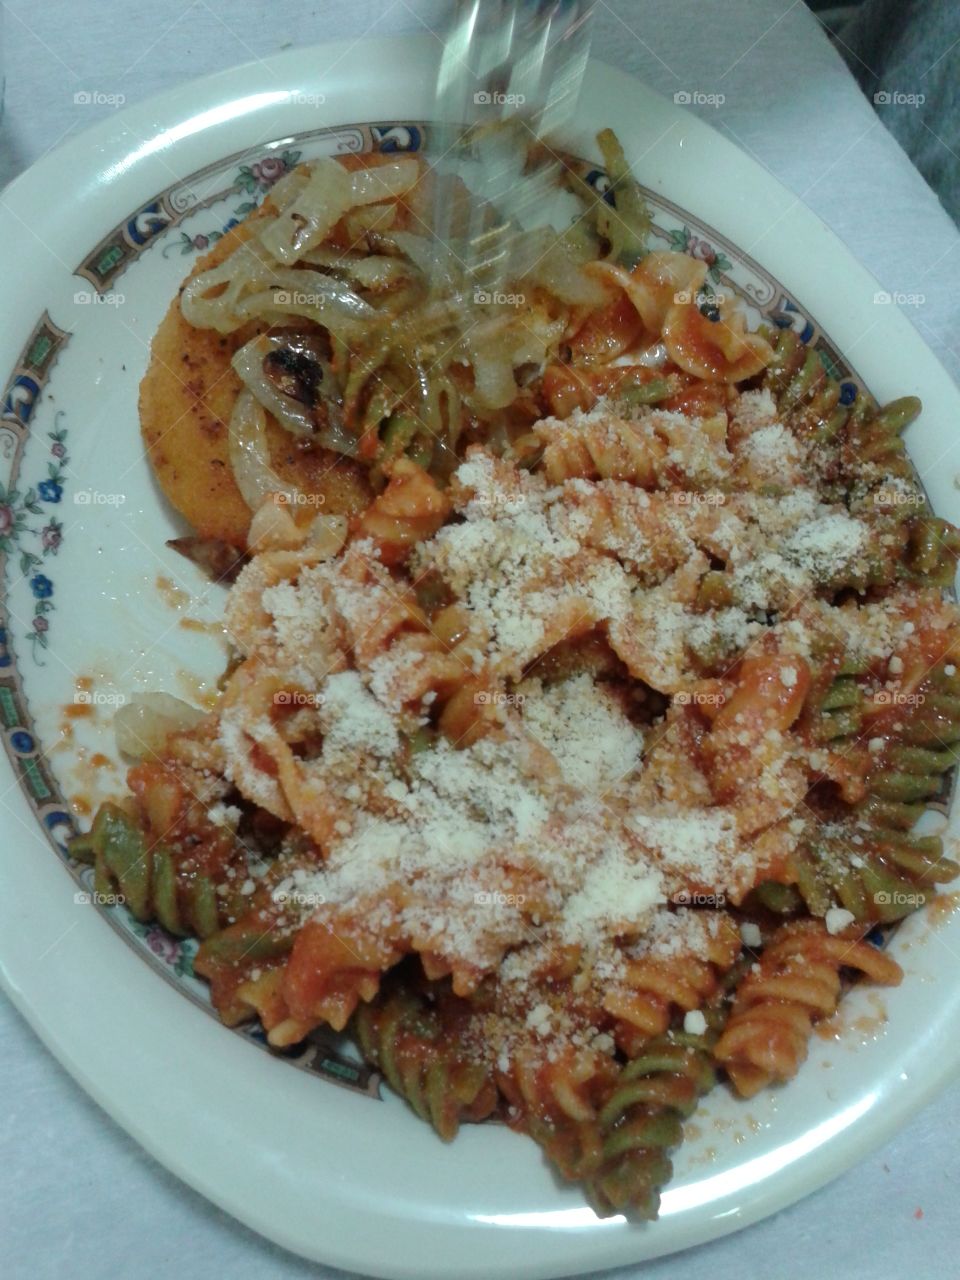 Pasta with Tomato basil & garlic sauce. I made this for dinner